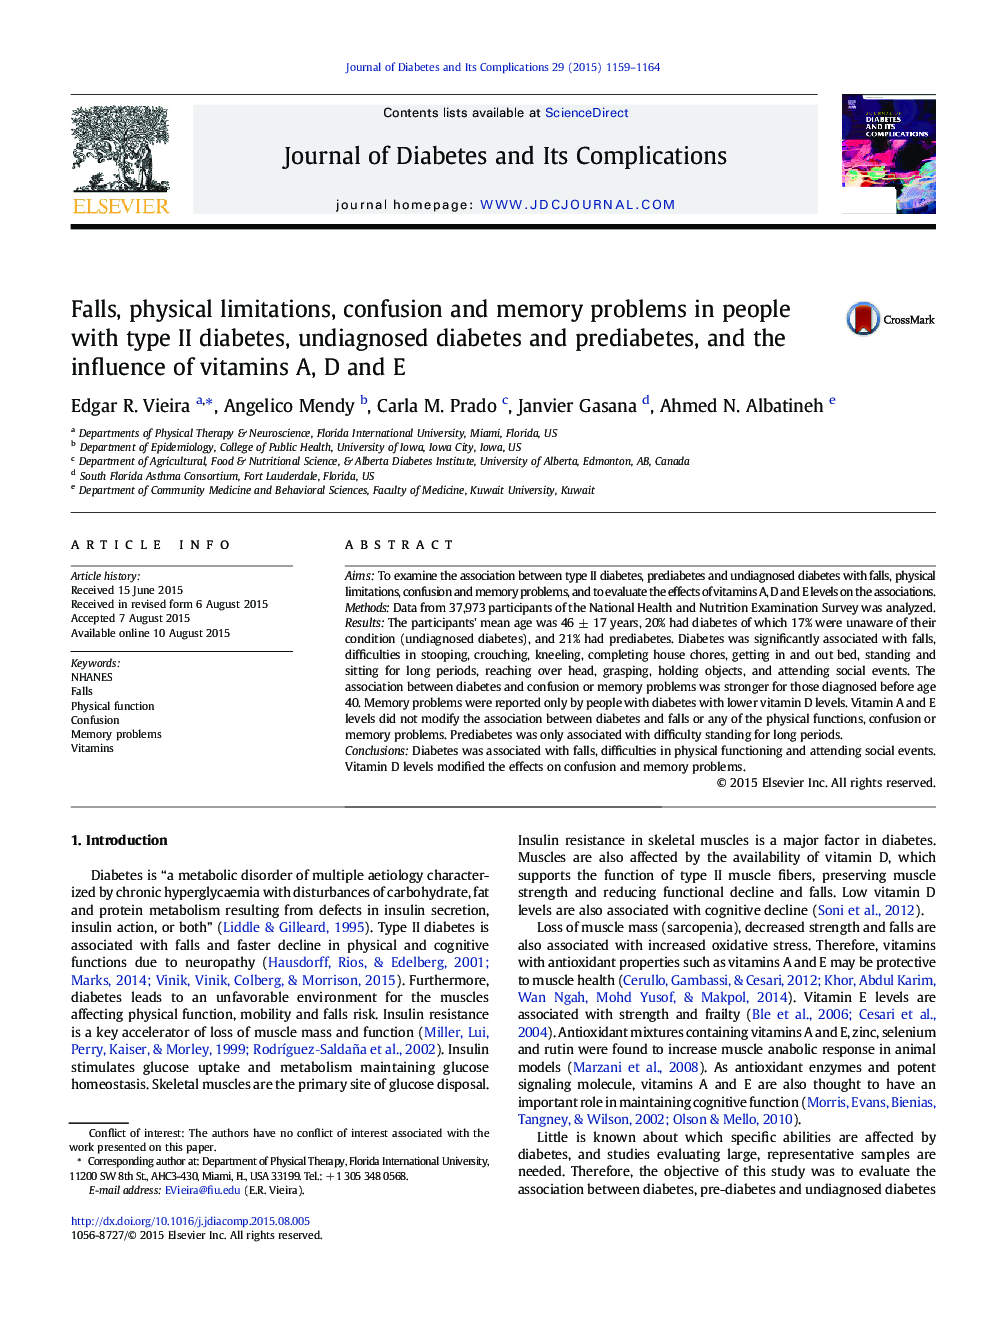 Falls, physical limitations, confusion and memory problems in people with type II diabetes, undiagnosed diabetes and prediabetes, and the influence of vitamins A, D and E